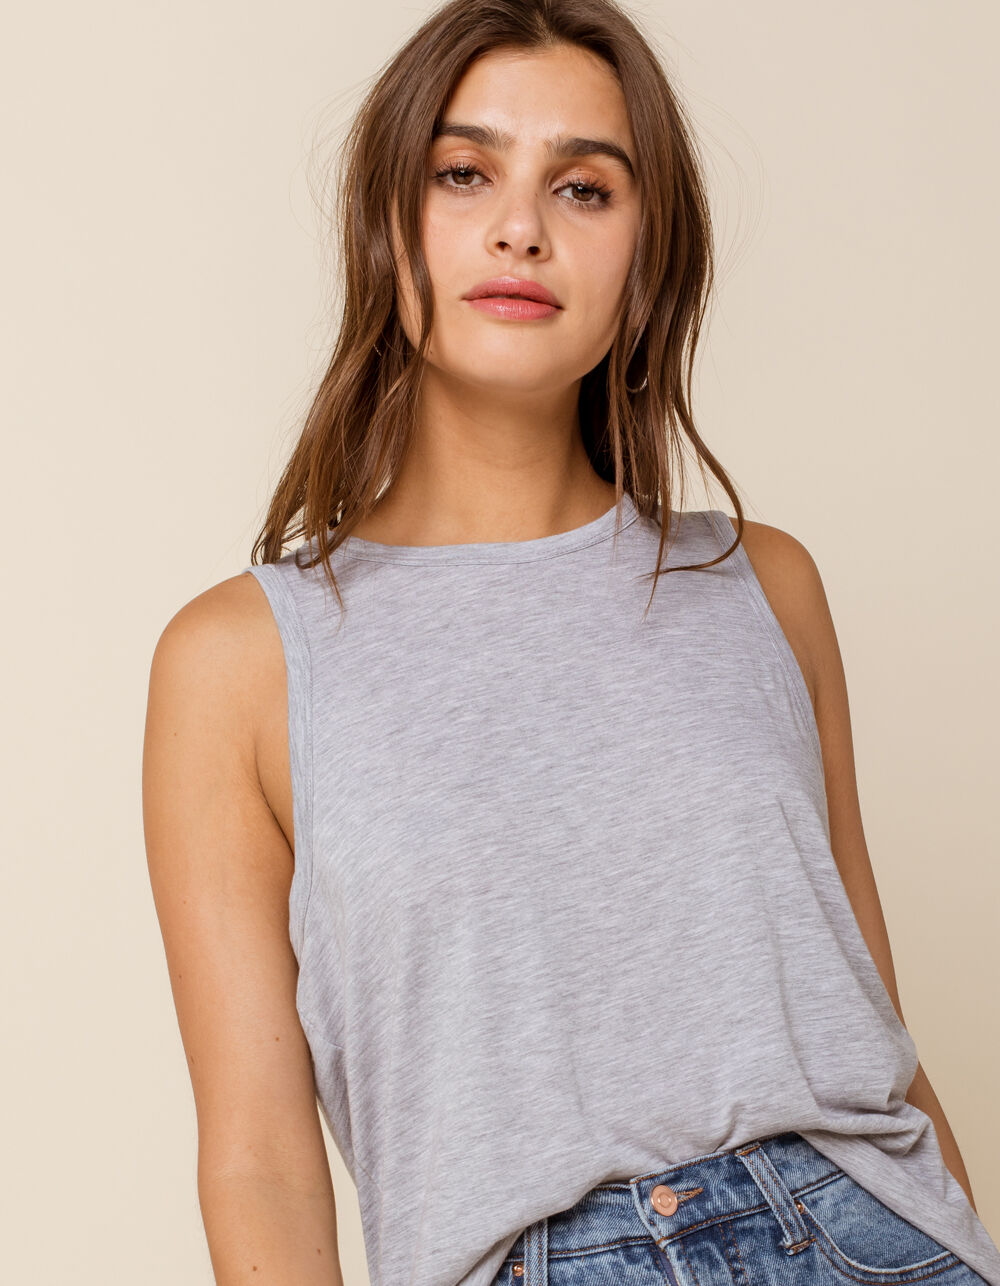 WEST OF MELROSE Sun's Out Womens Heather Gray Muscle Tee image number 0